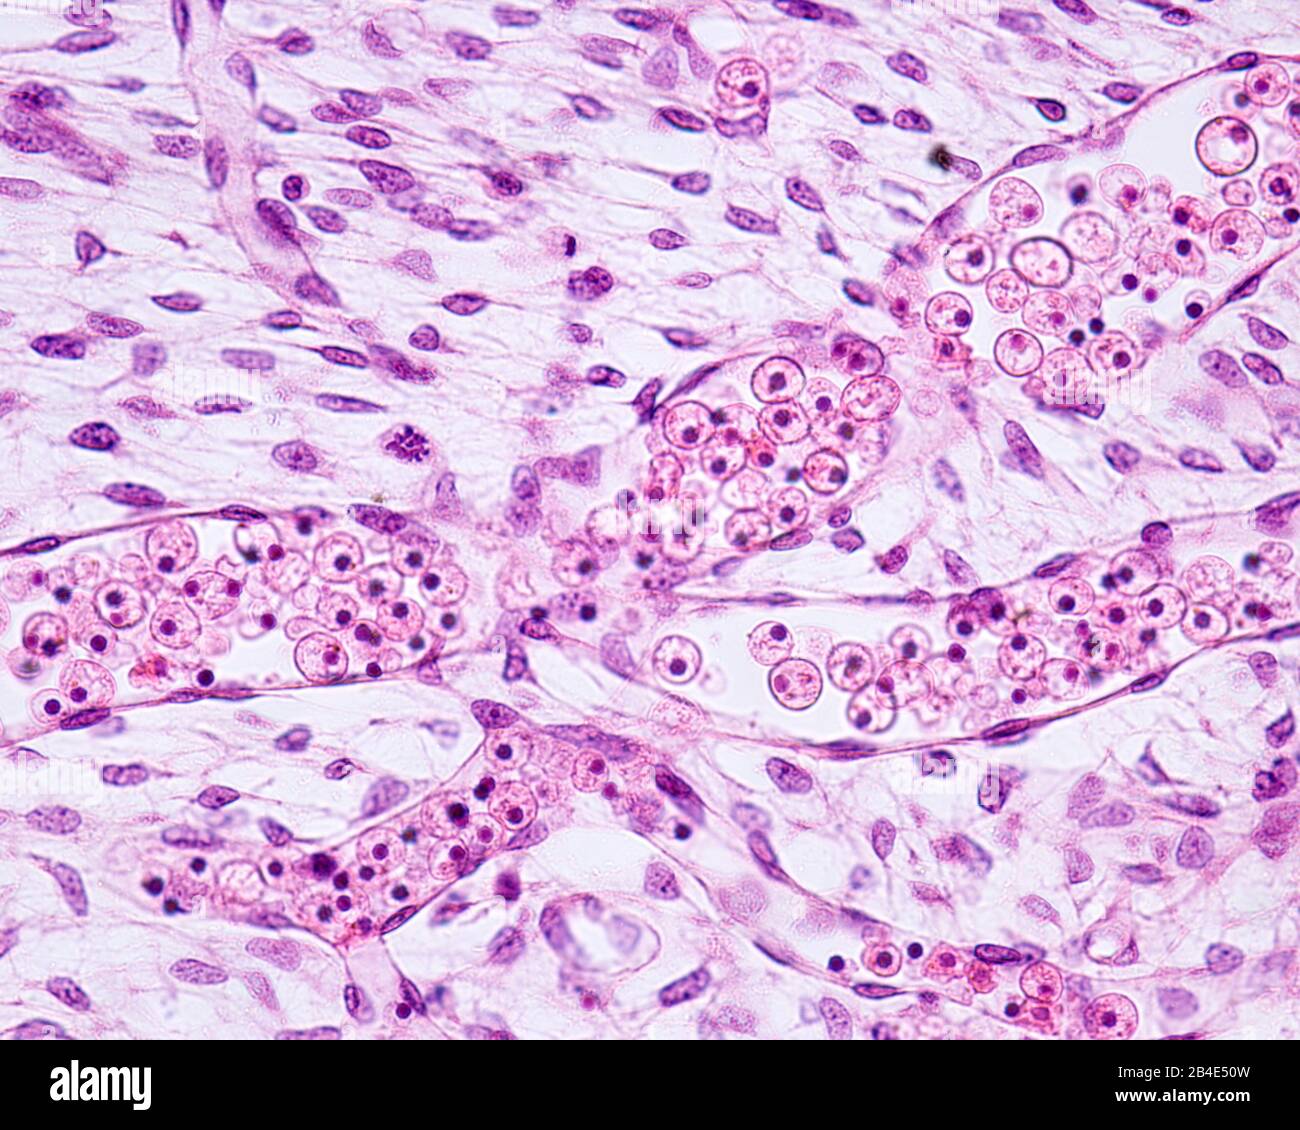 Blood vessels in embryonic tissue. The vessels are lined by endothelium (simple squamous epithelium) and contain inside immature nucleated red blood c Stock Photo